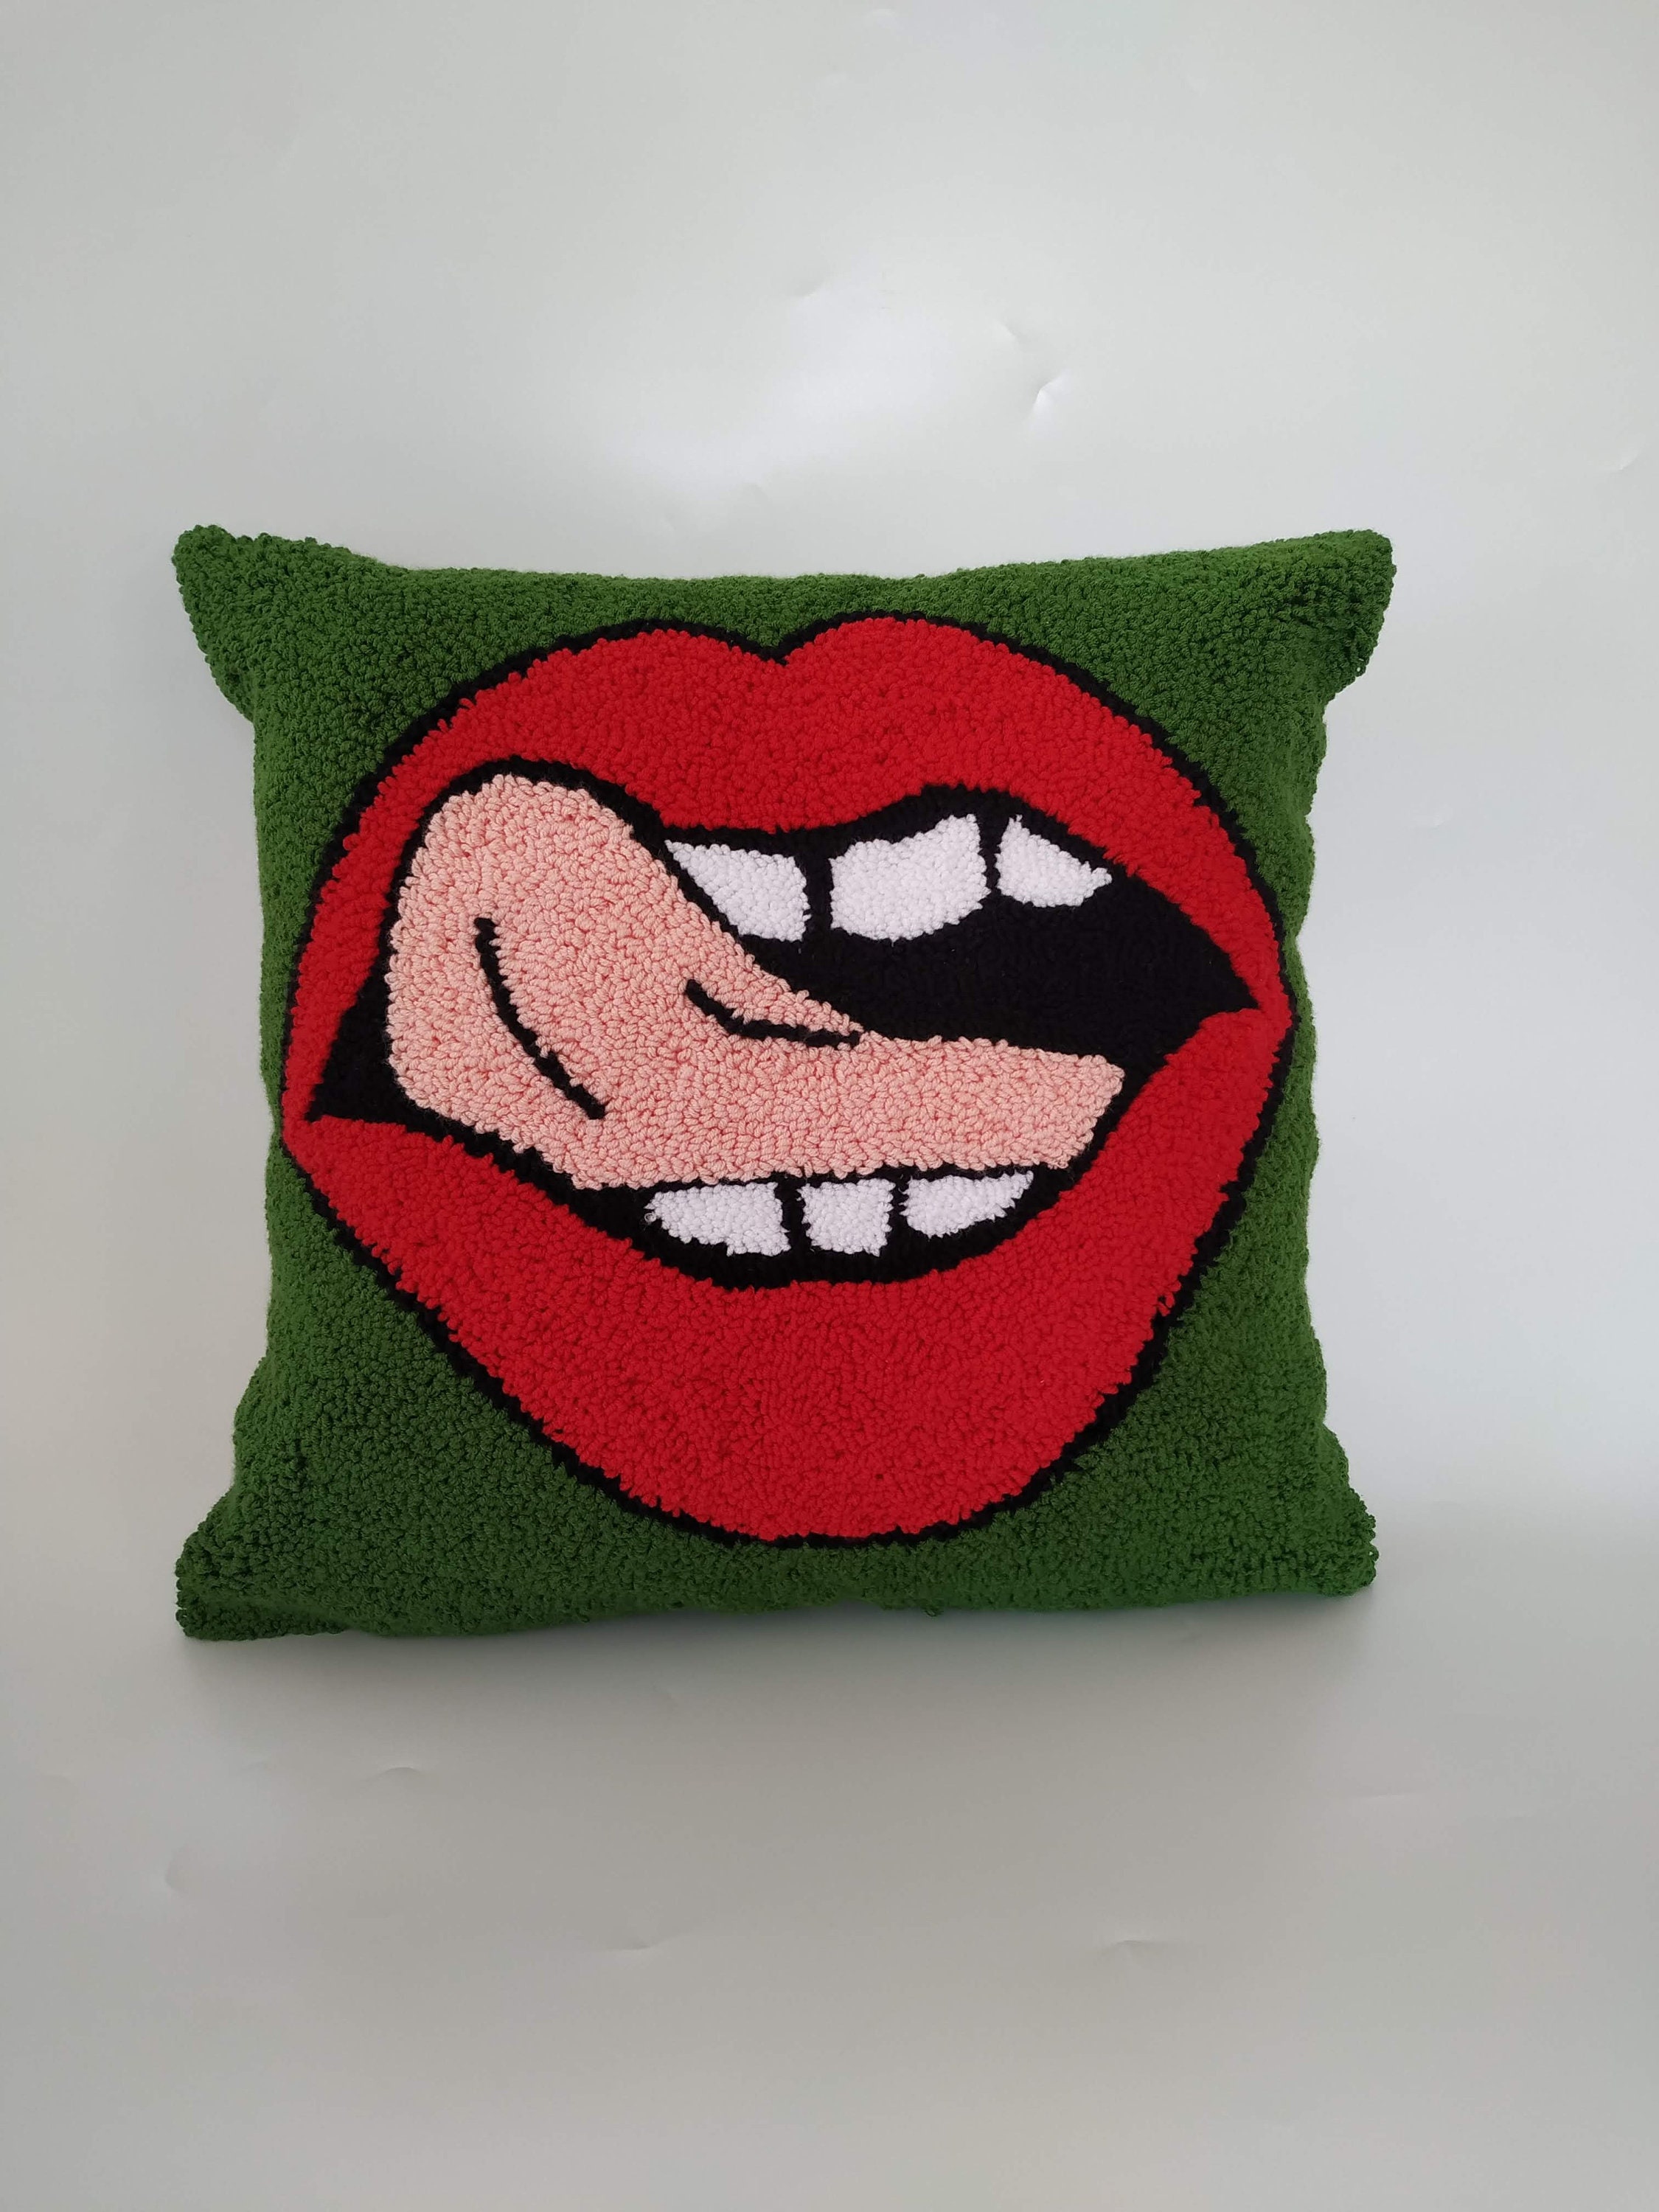 Cameltoe pun string Sexy Dirty Gift Throw Pillow by DH Designed